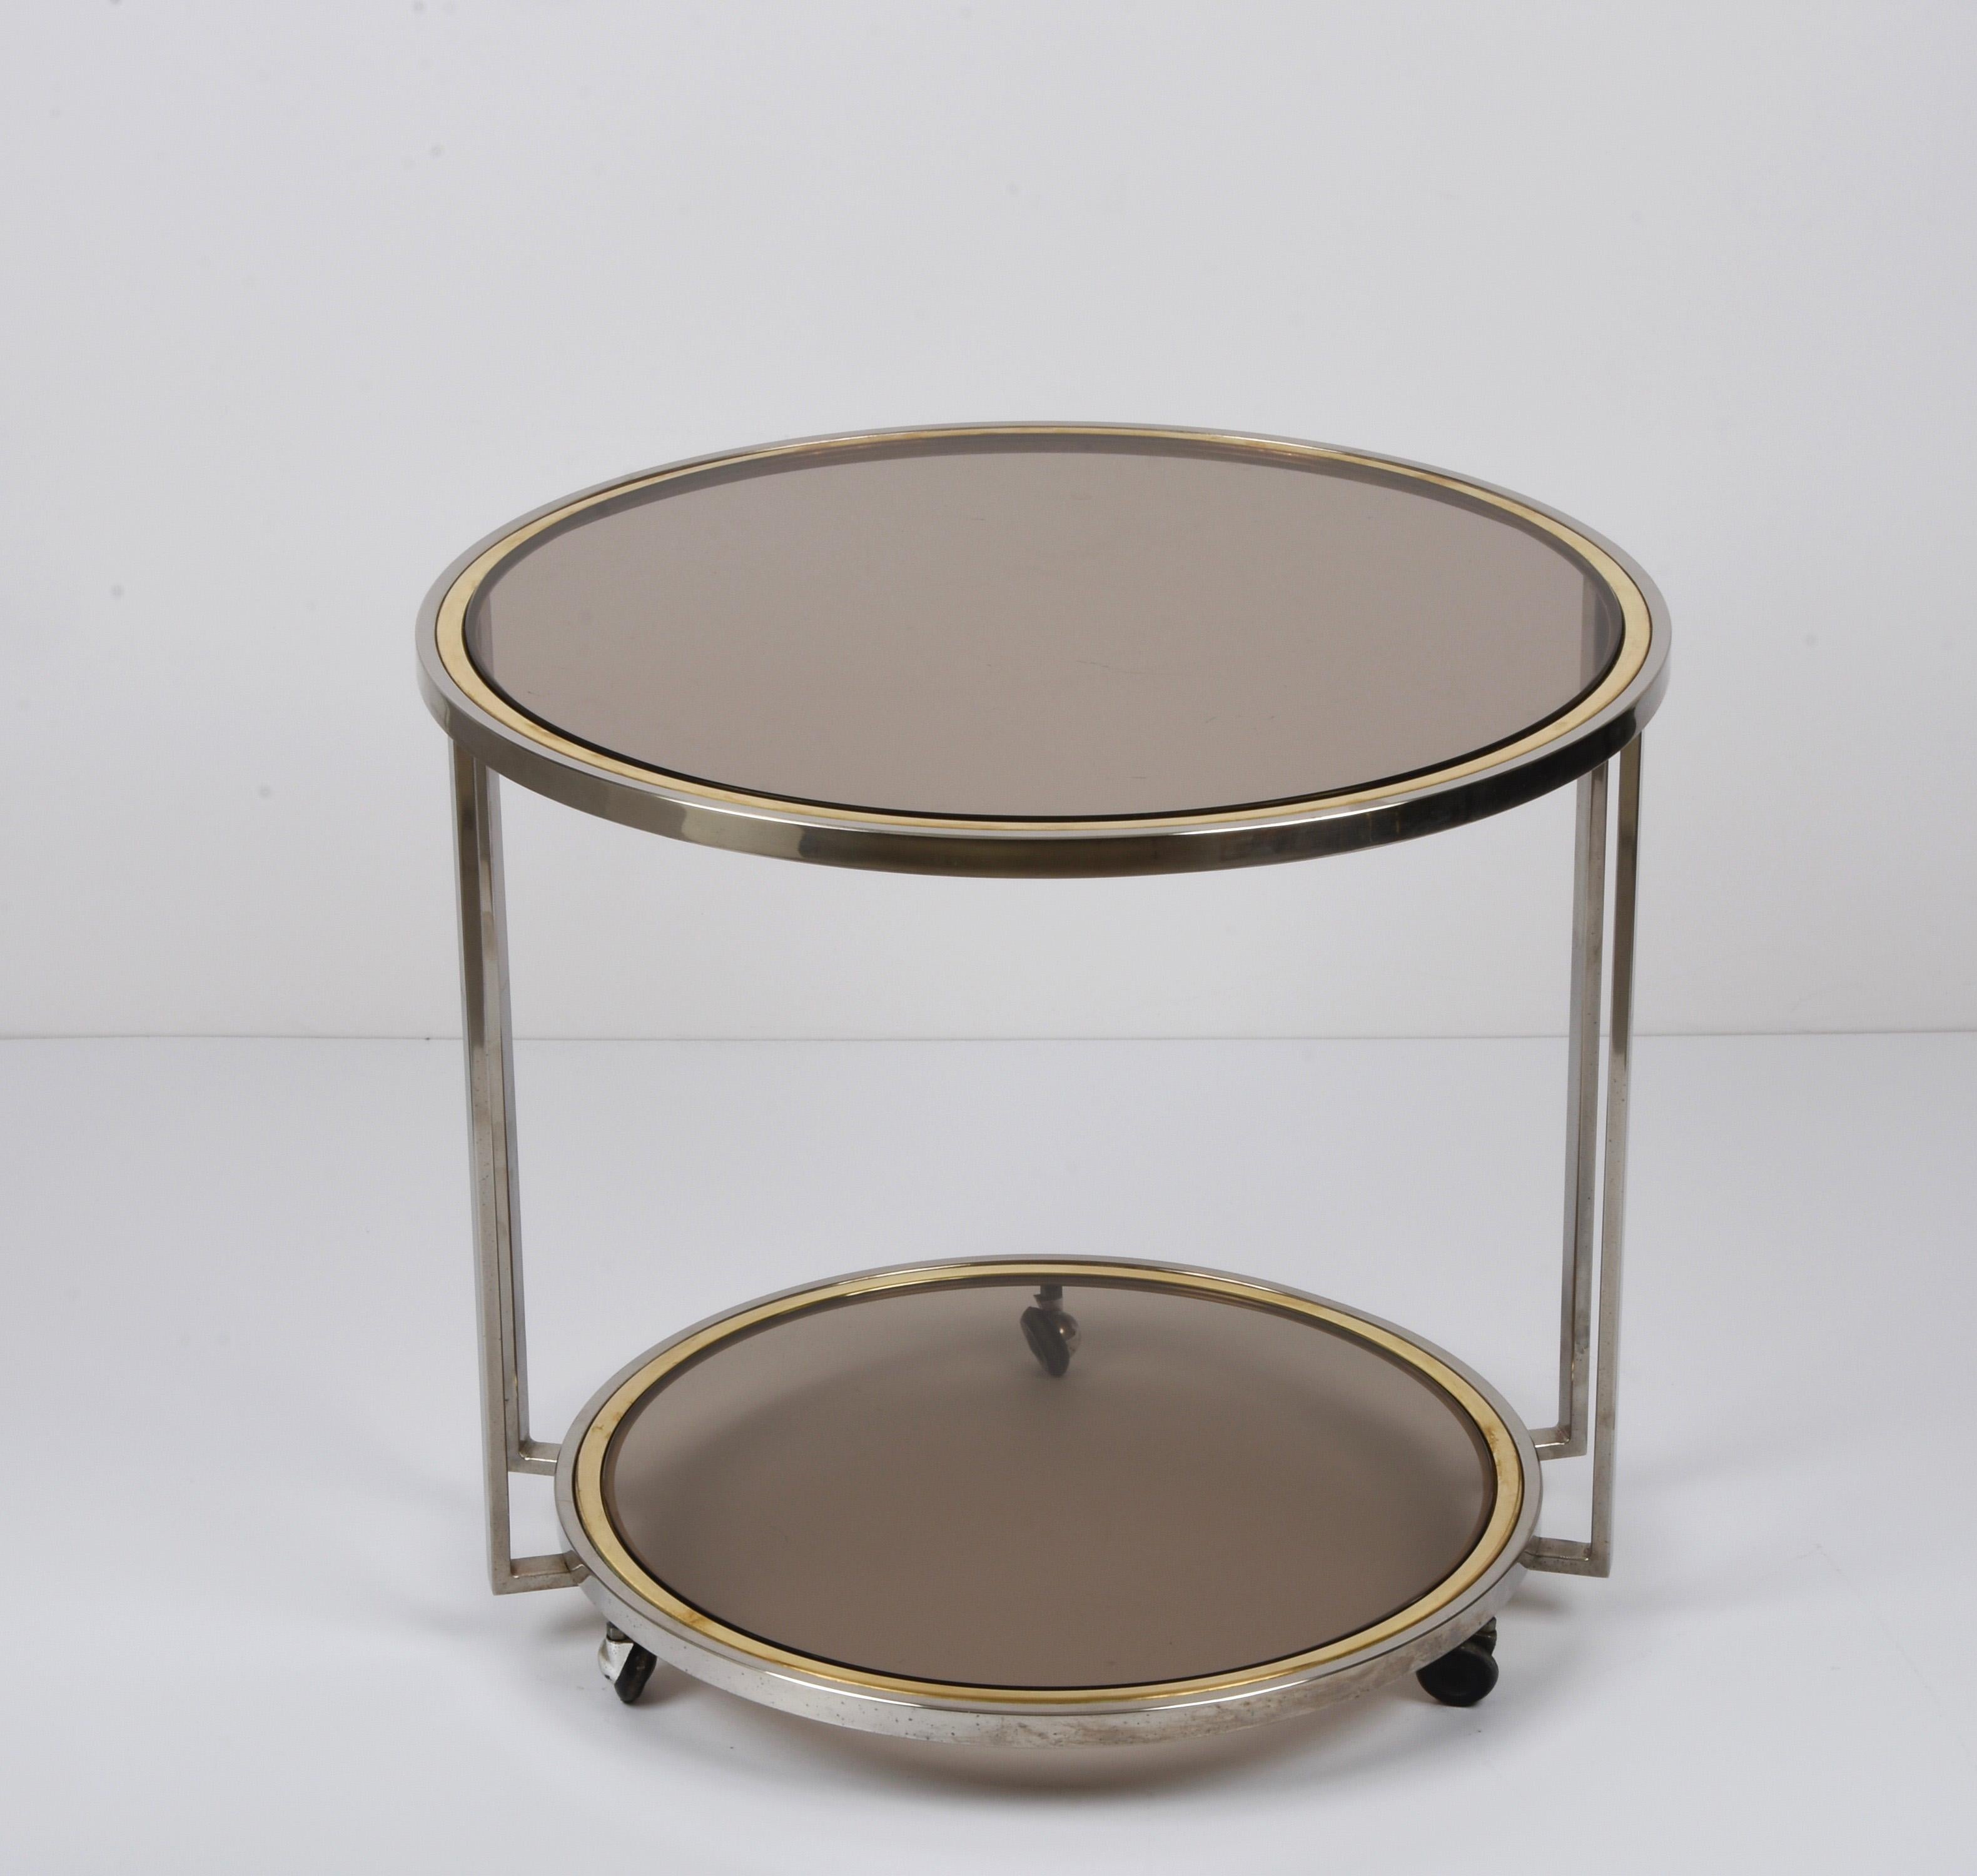 Incredible midcentury three-wheeled round side table in chrome, brass, and smoked bronzed glass. The upper floor has a diameter of 61 cm while the lower one is delightfully smaller and has a diameter of 51 cms. This wonderful piece was designed